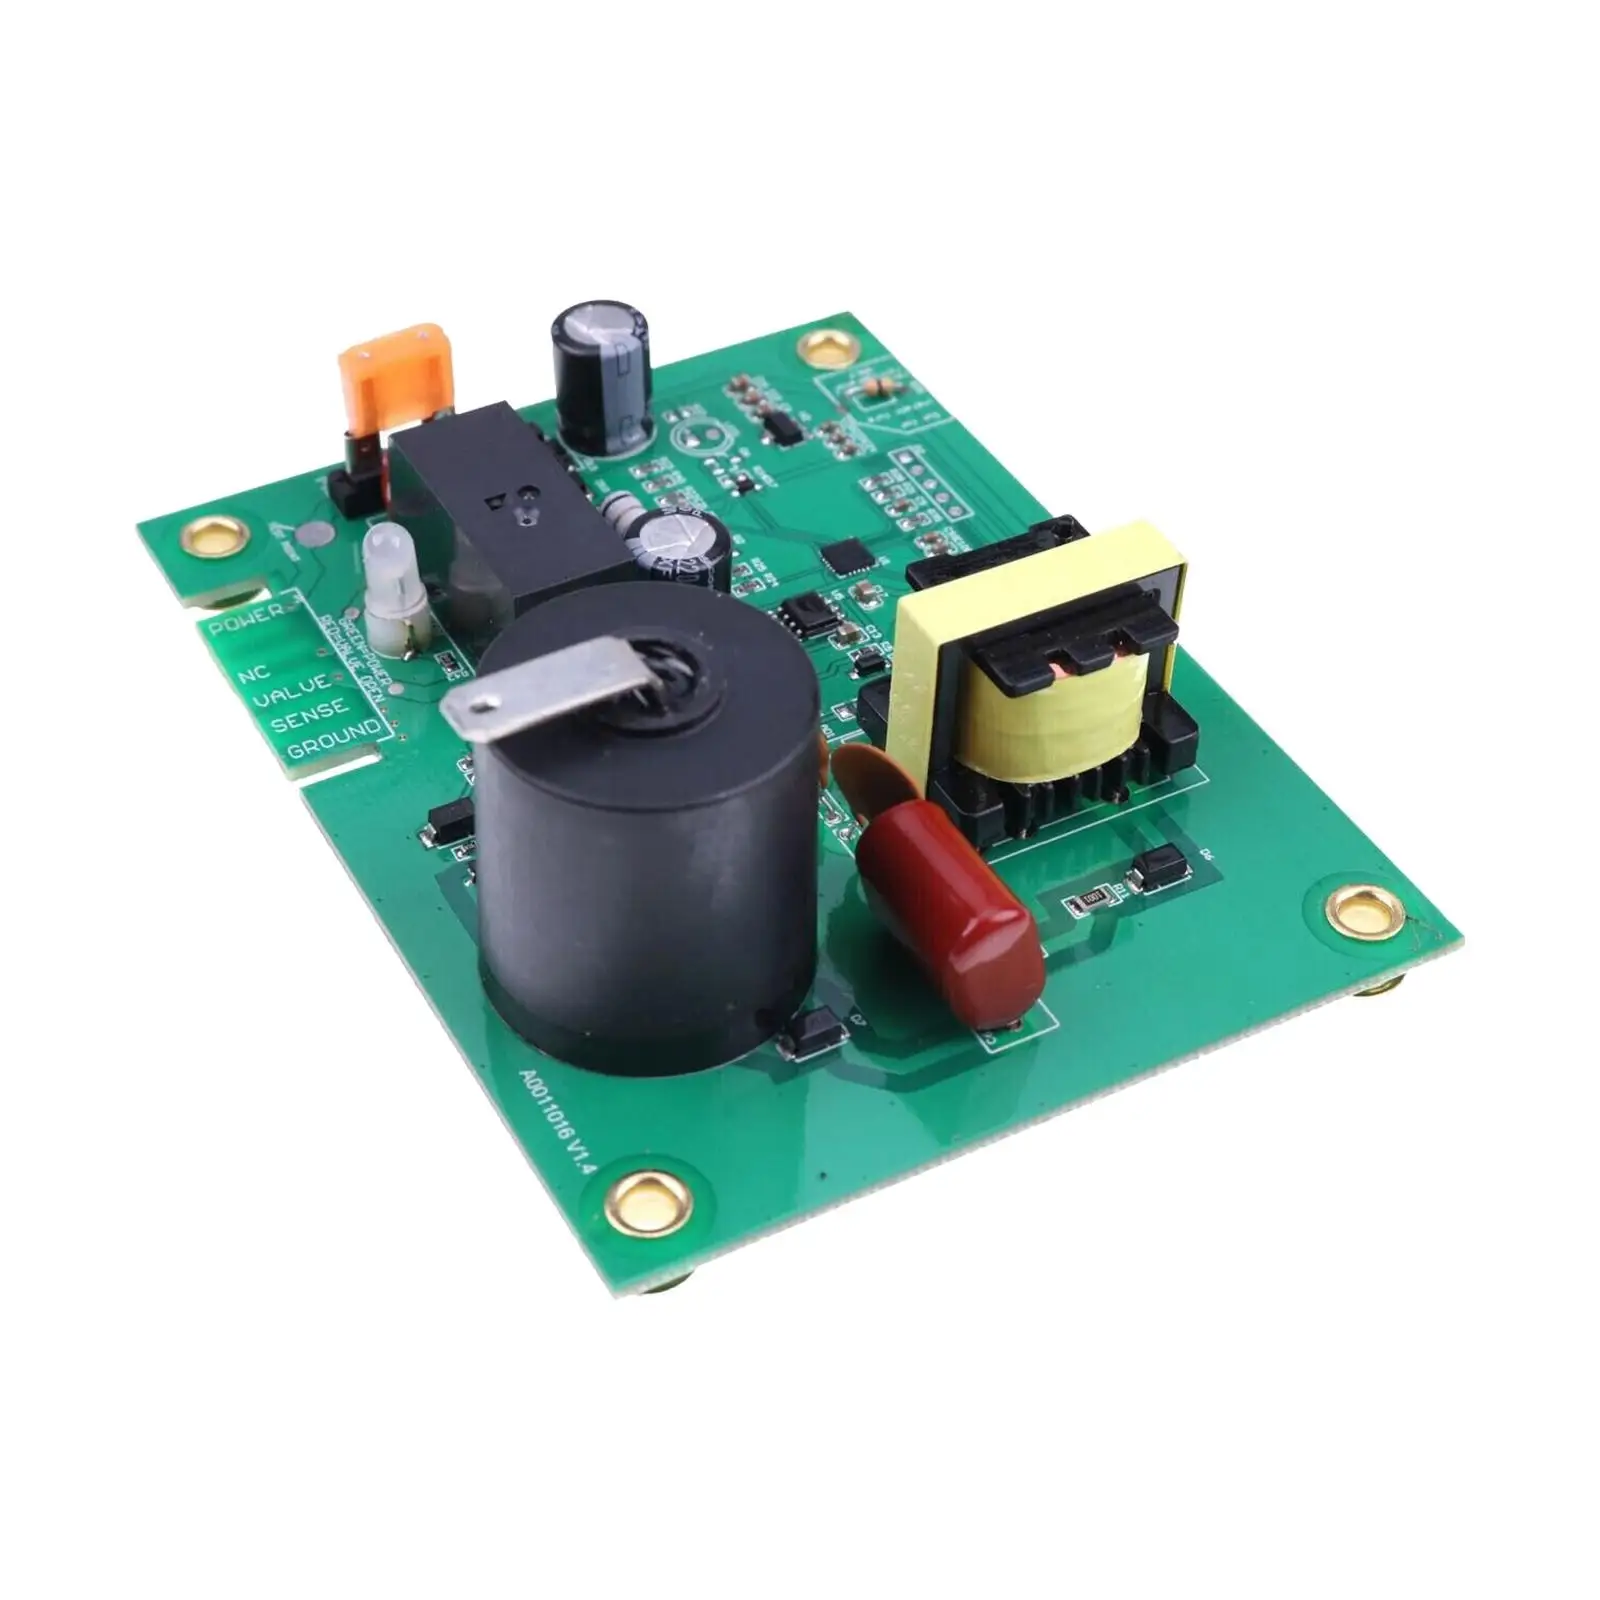 

Ignitor Board Uib S Universal DC 12V External Sense Connector Water Heater Control Circuit Board Professional Easily to Install